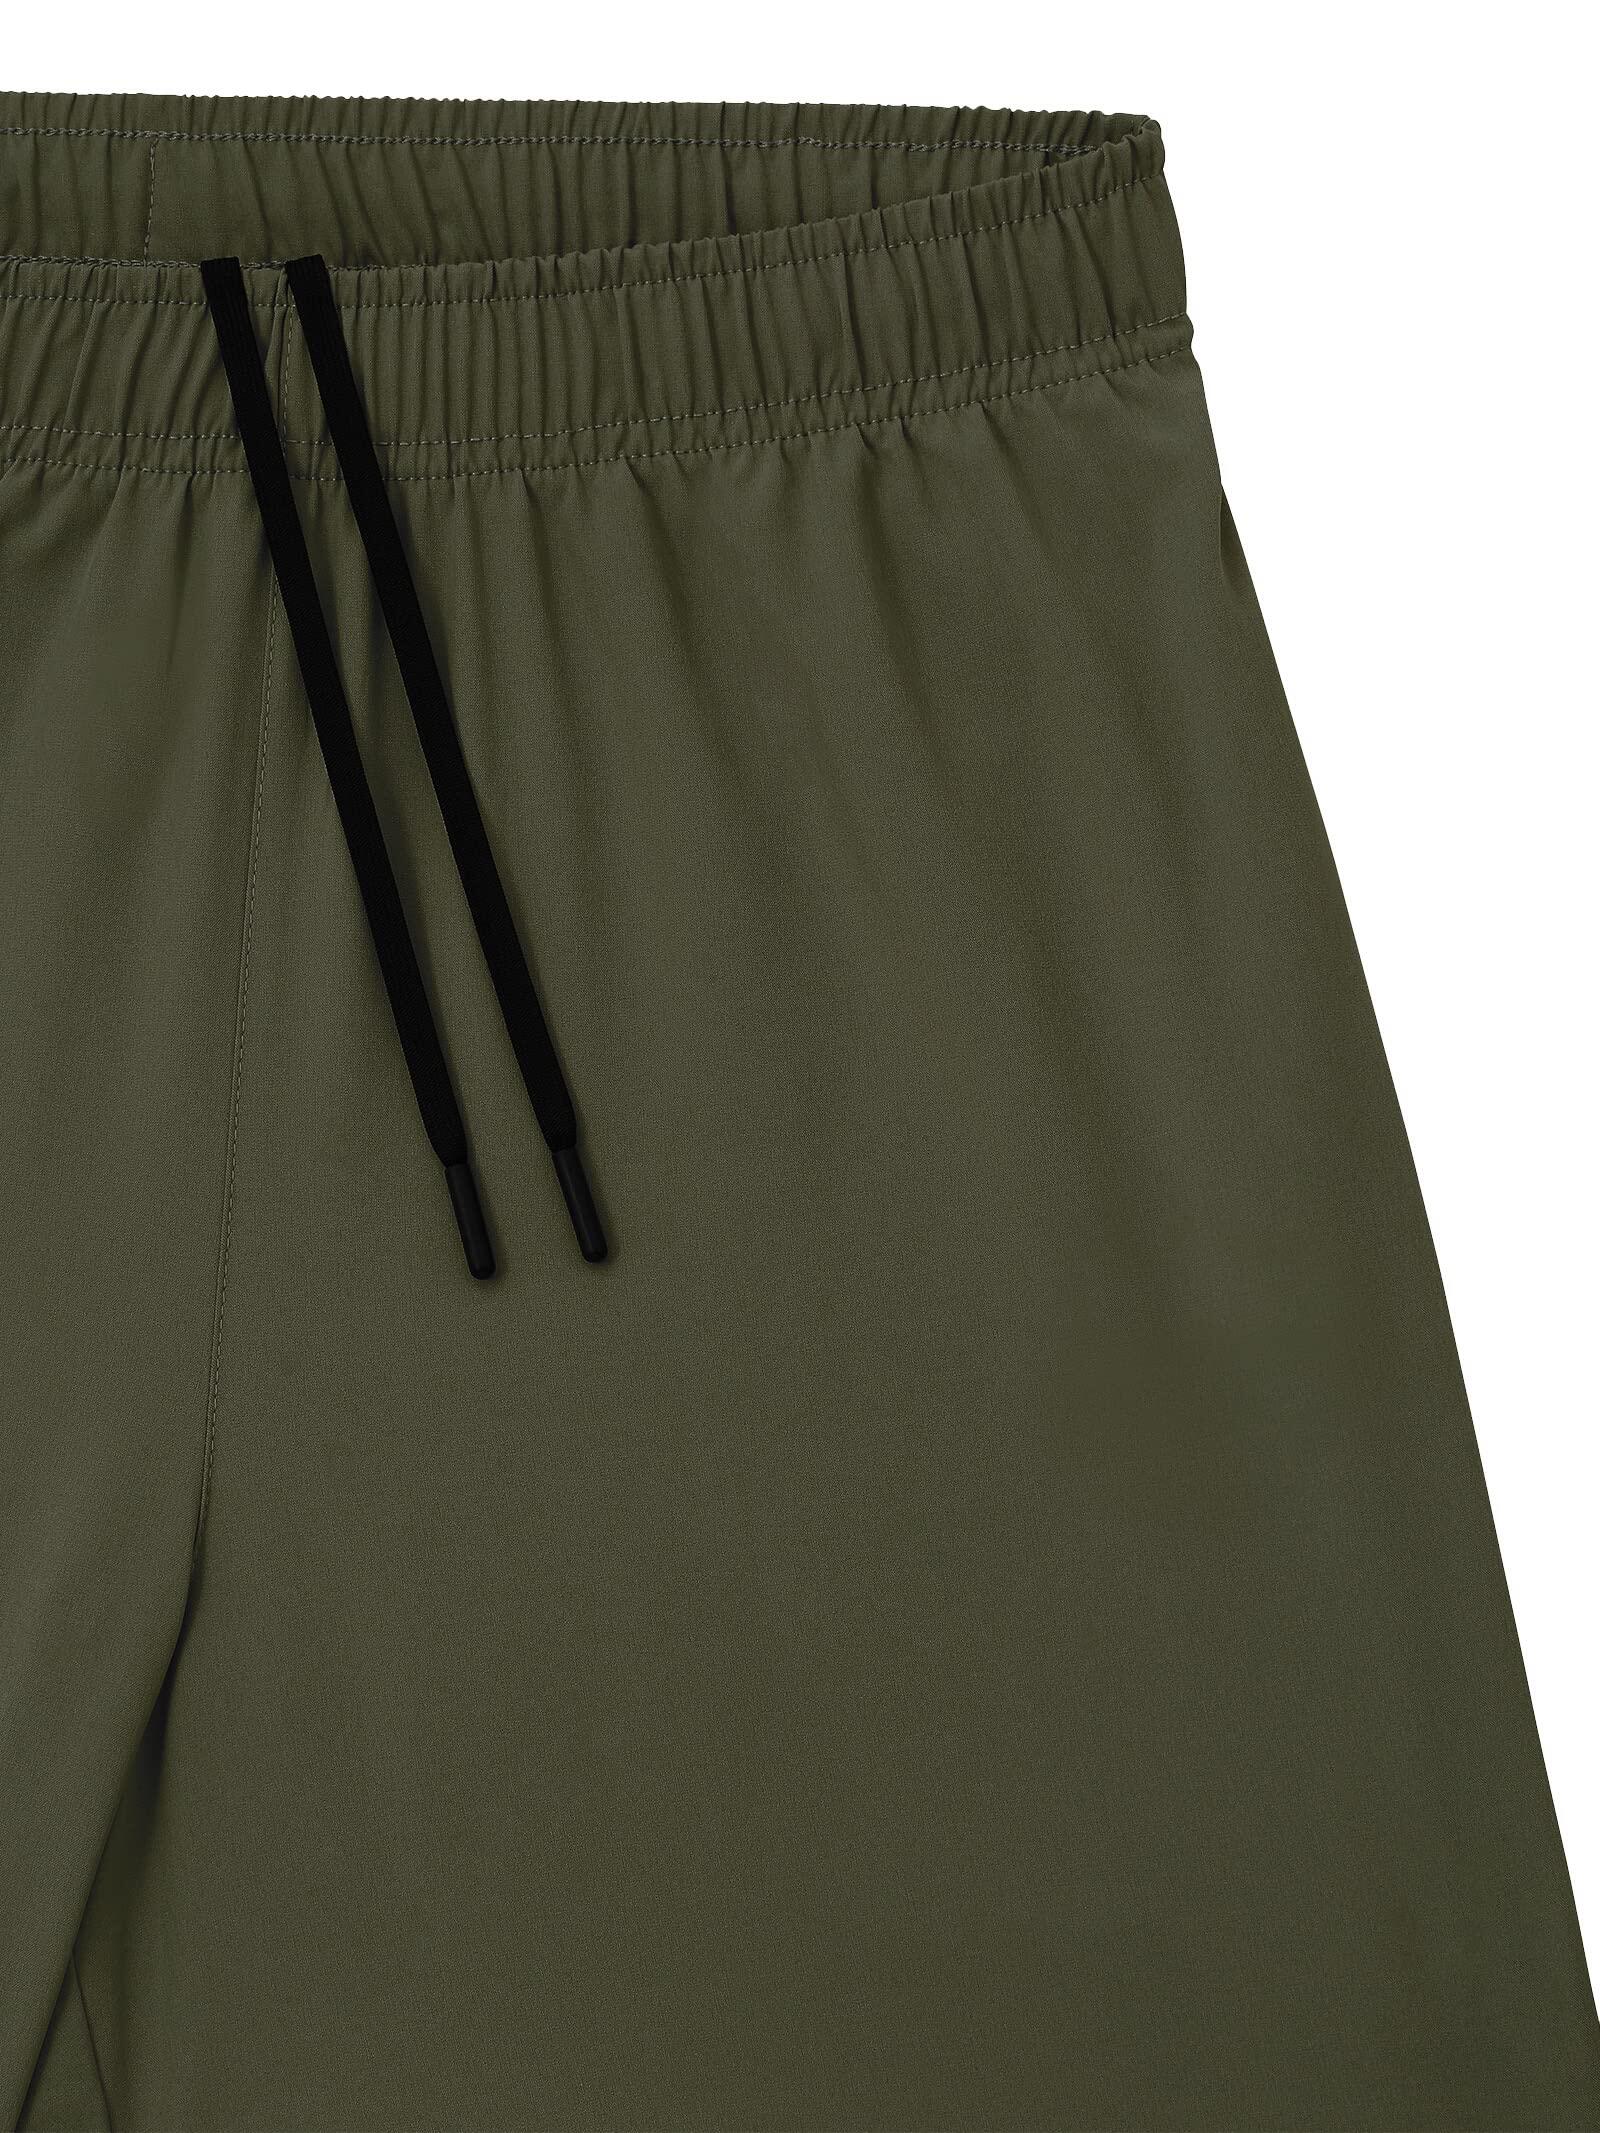 Men's Ultra 2-in-1 Running Shorts with Key Pocket - Forest Night 4/5